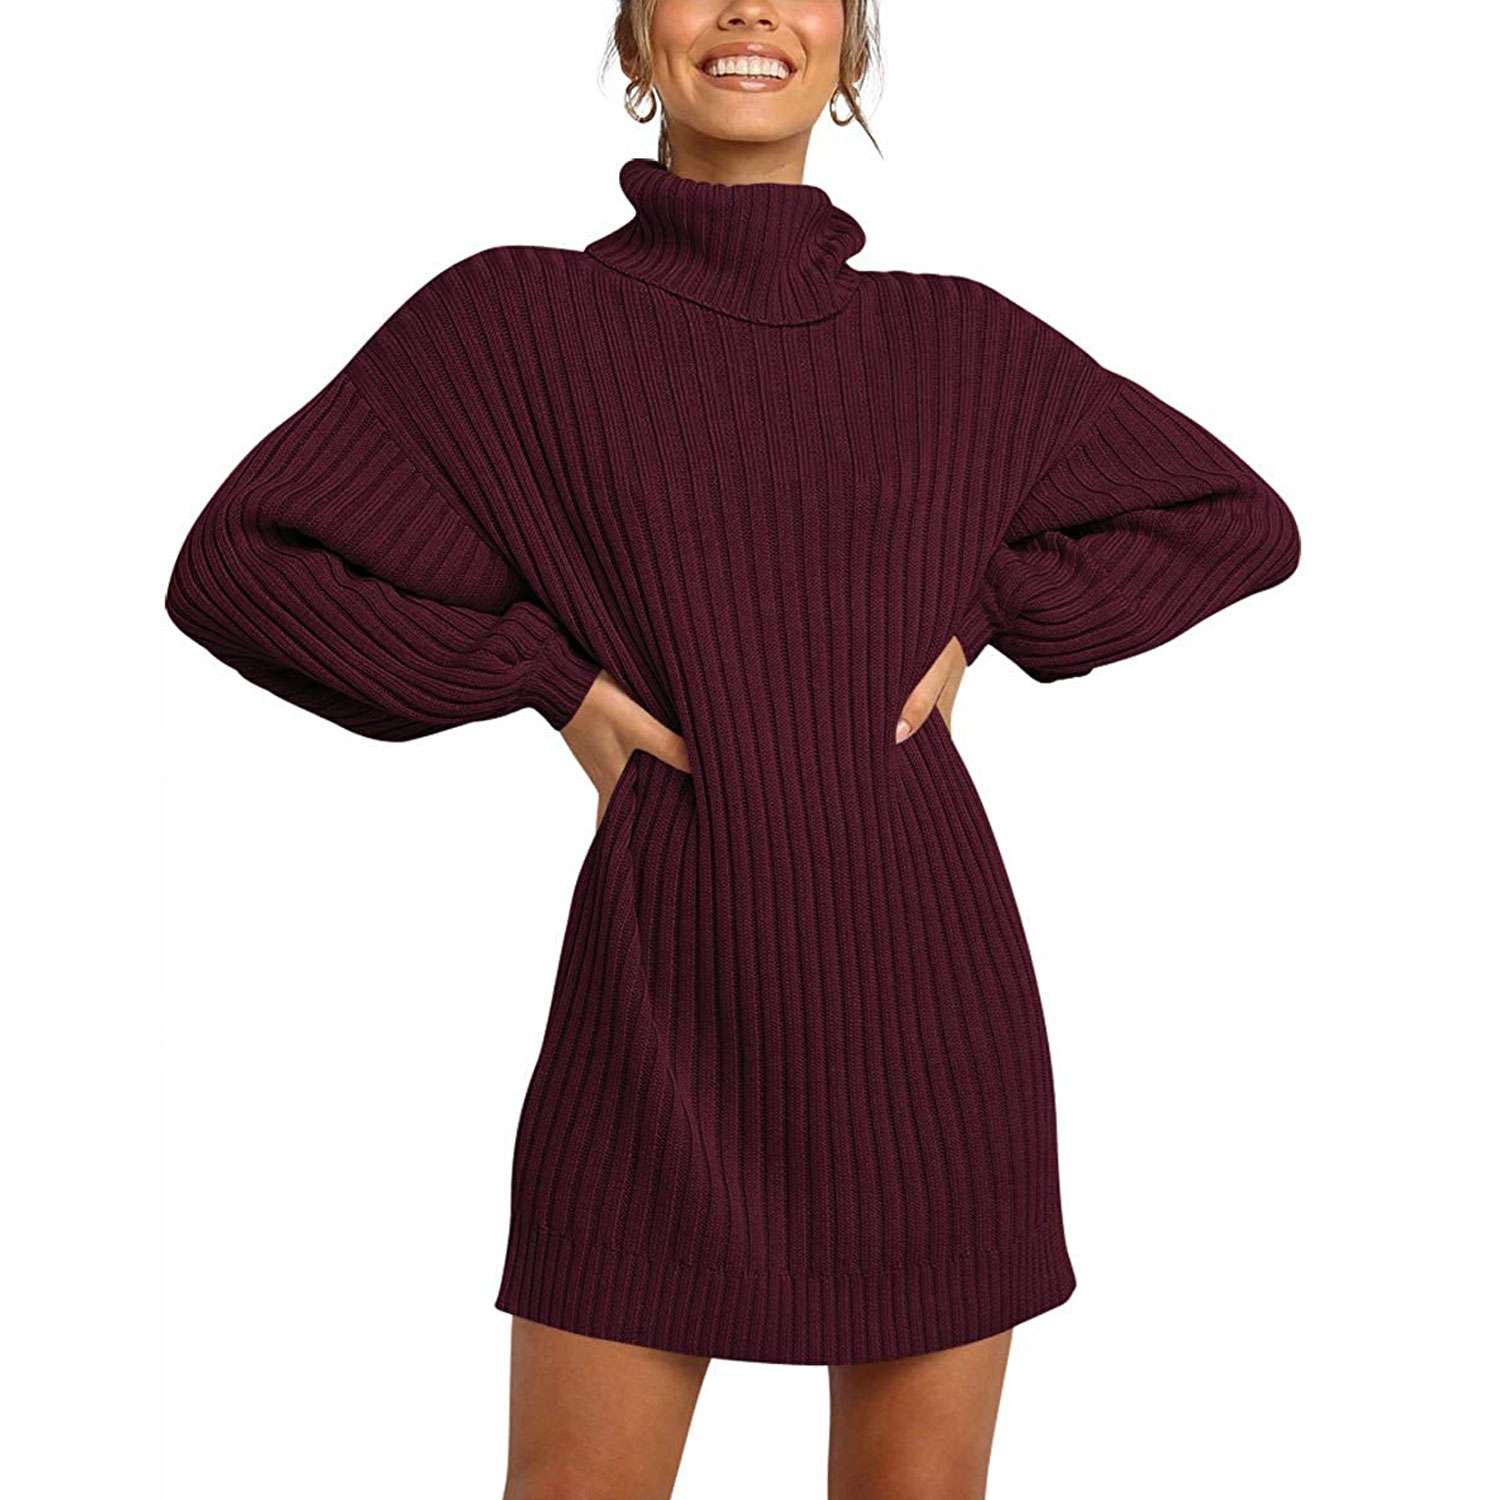 The Anrabess Turtleneck Sweater Dress Is Just $32 at Amazon | PEOPLE.com